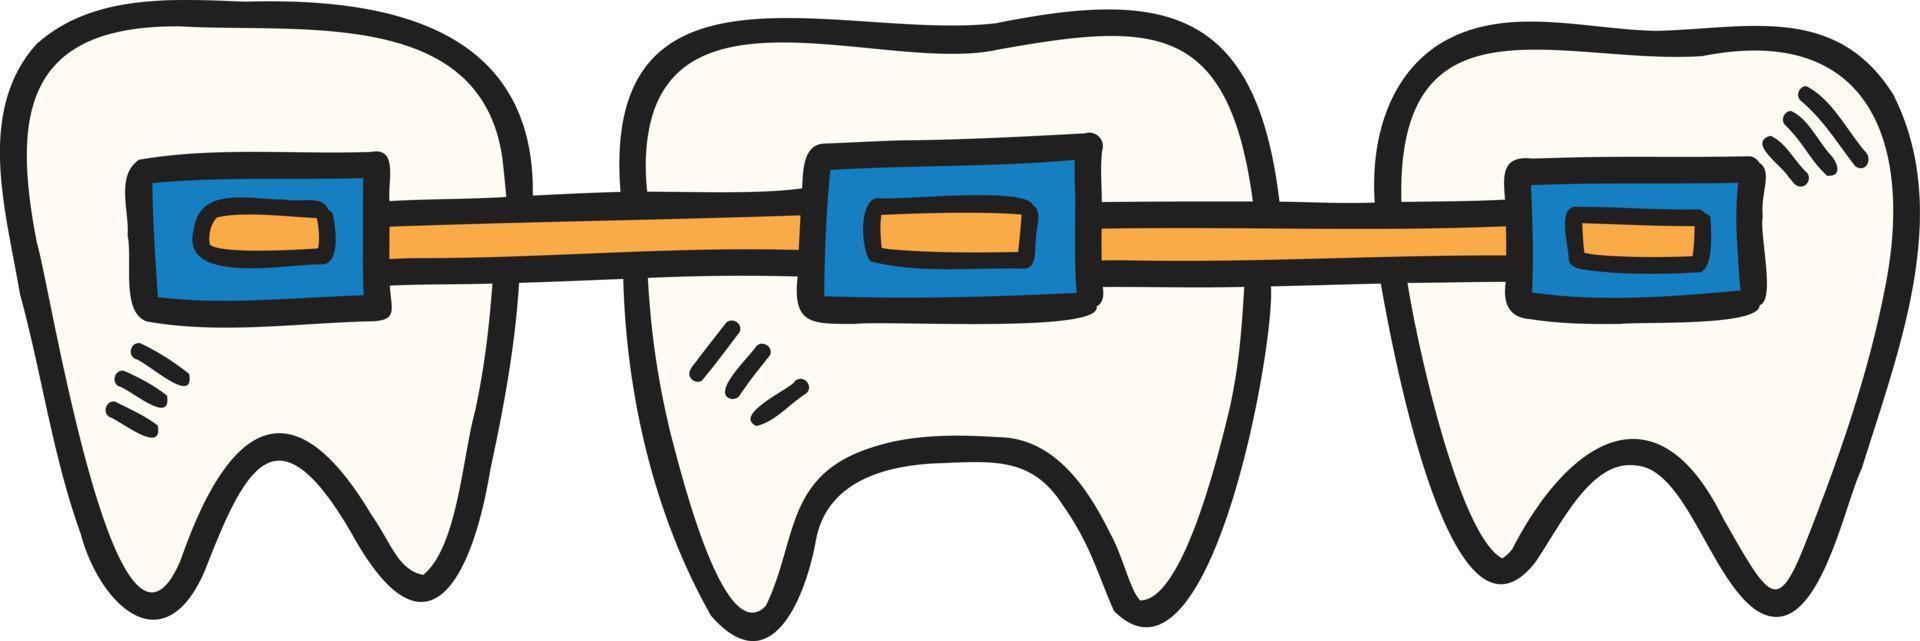 Hand Drawn braces and teeth illustration vector